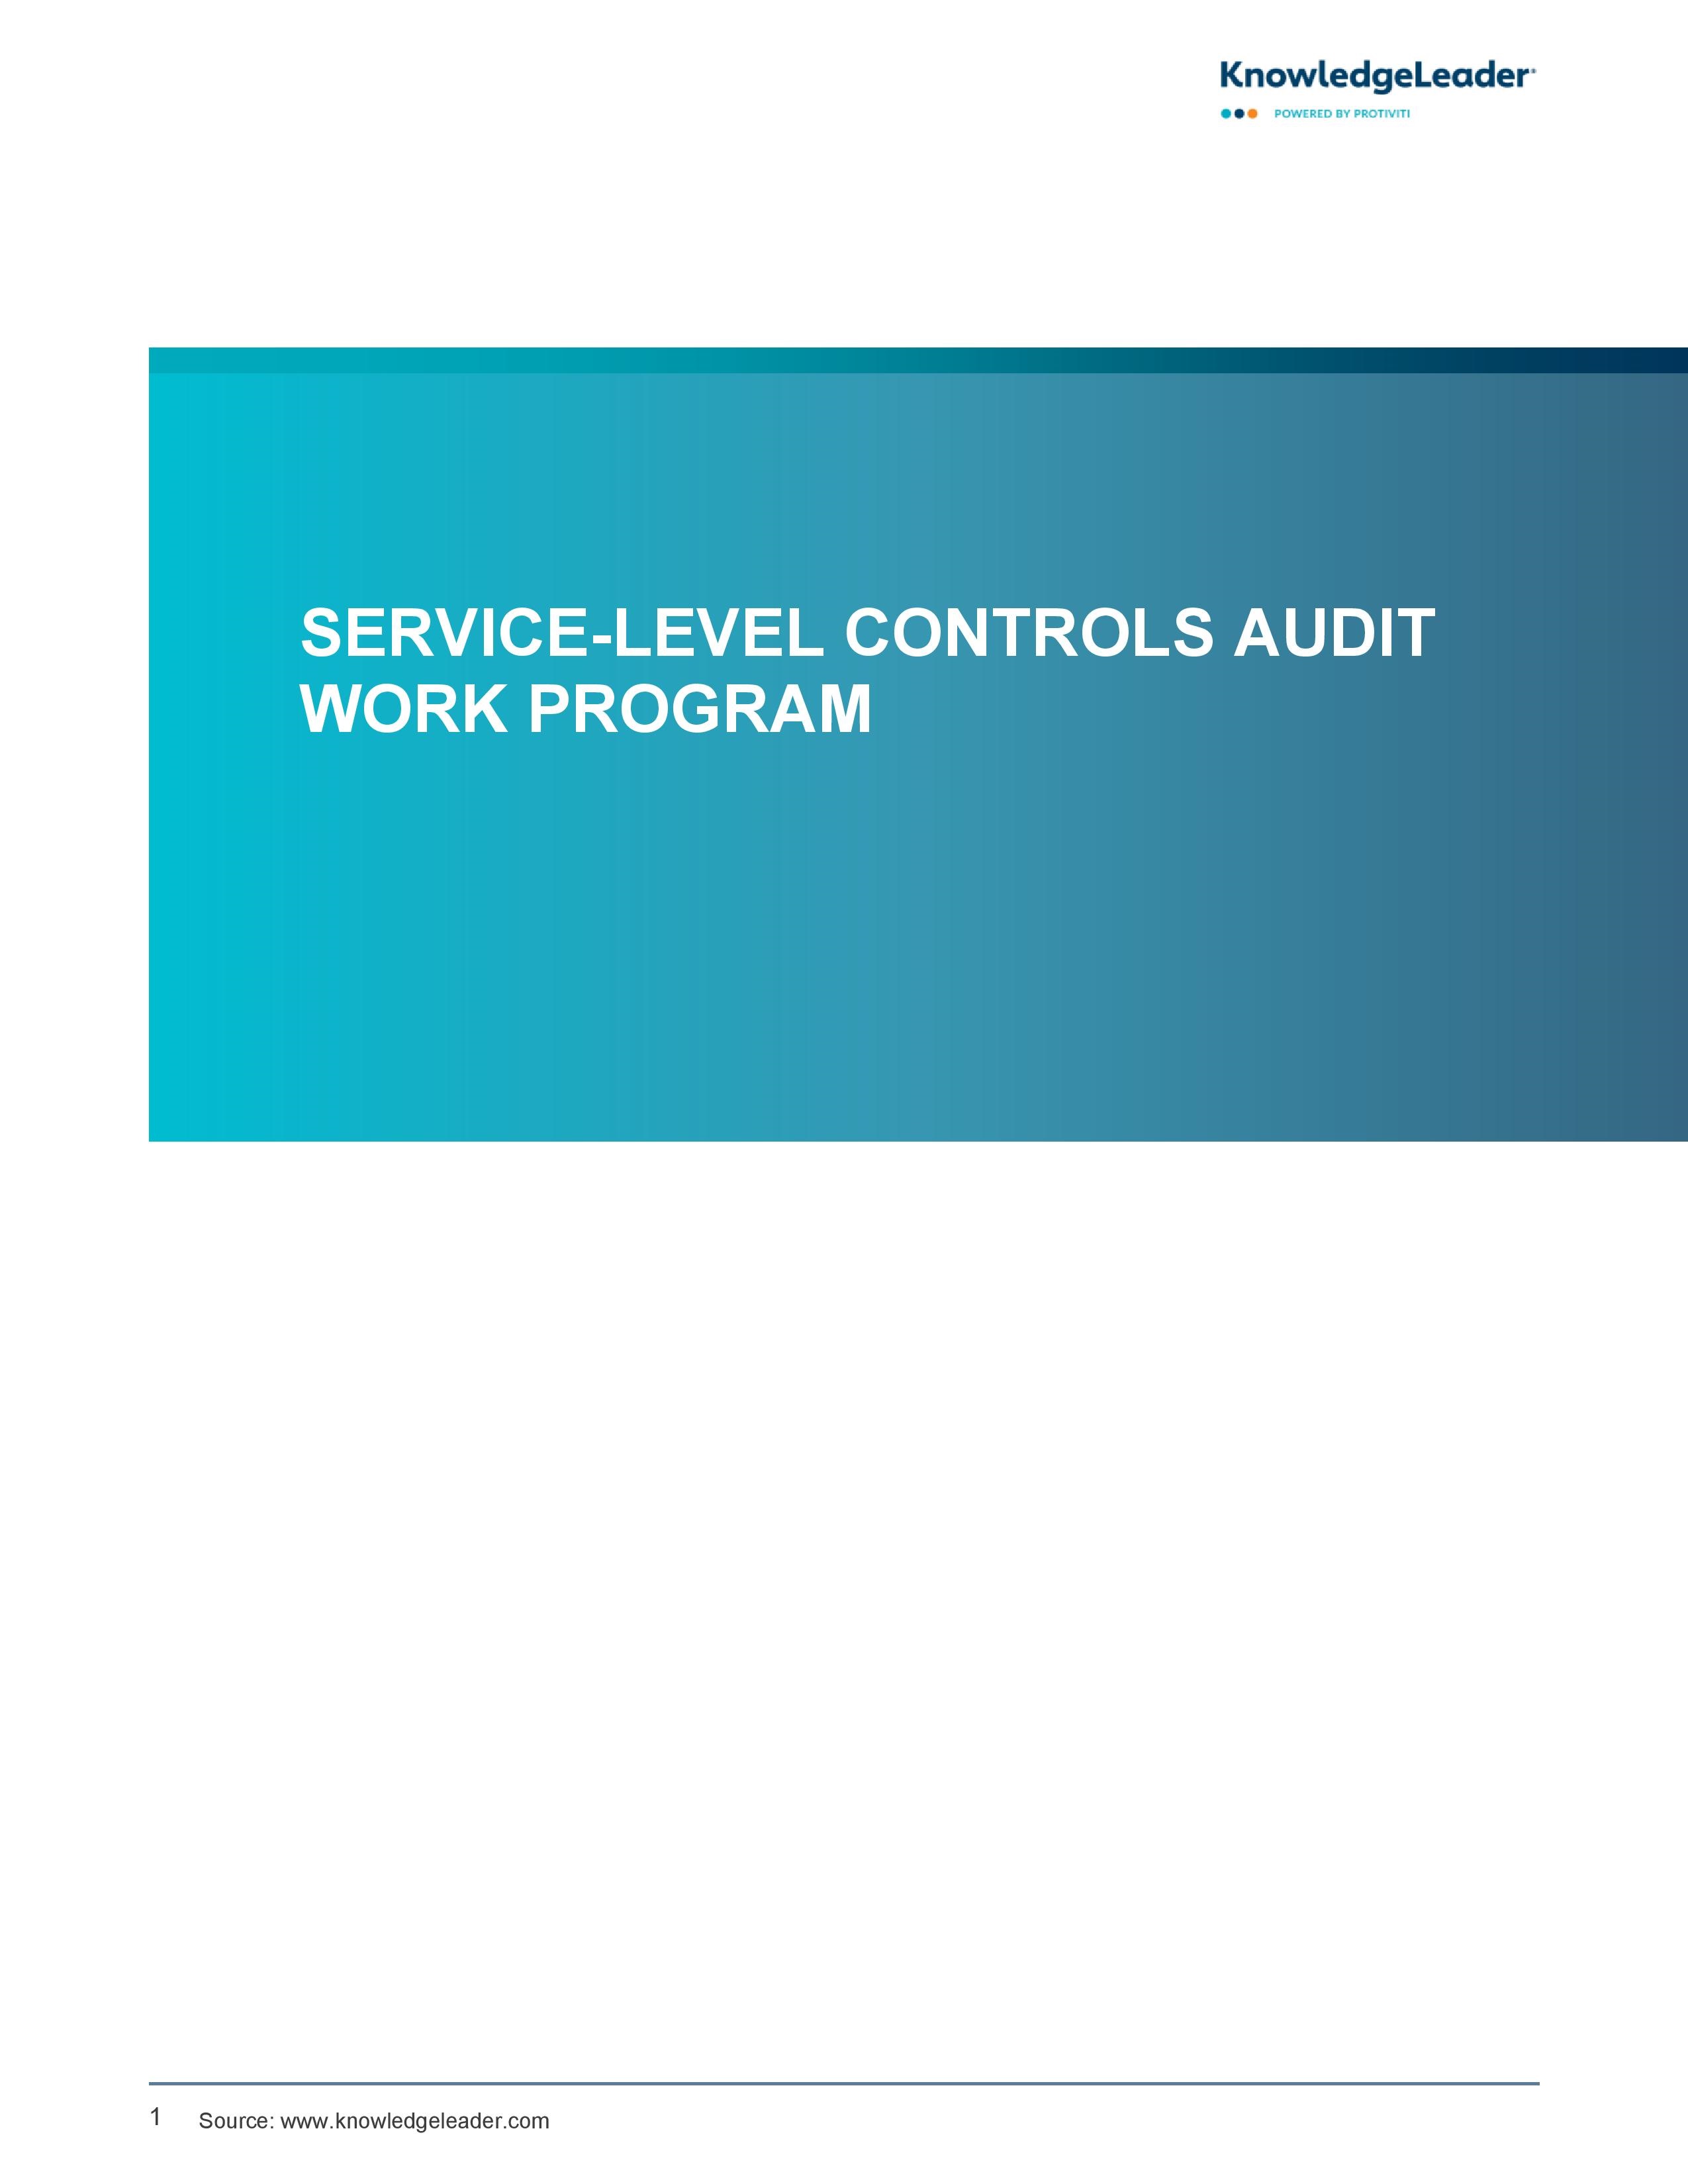 screenshot of the first page of the service-level controls audit work program